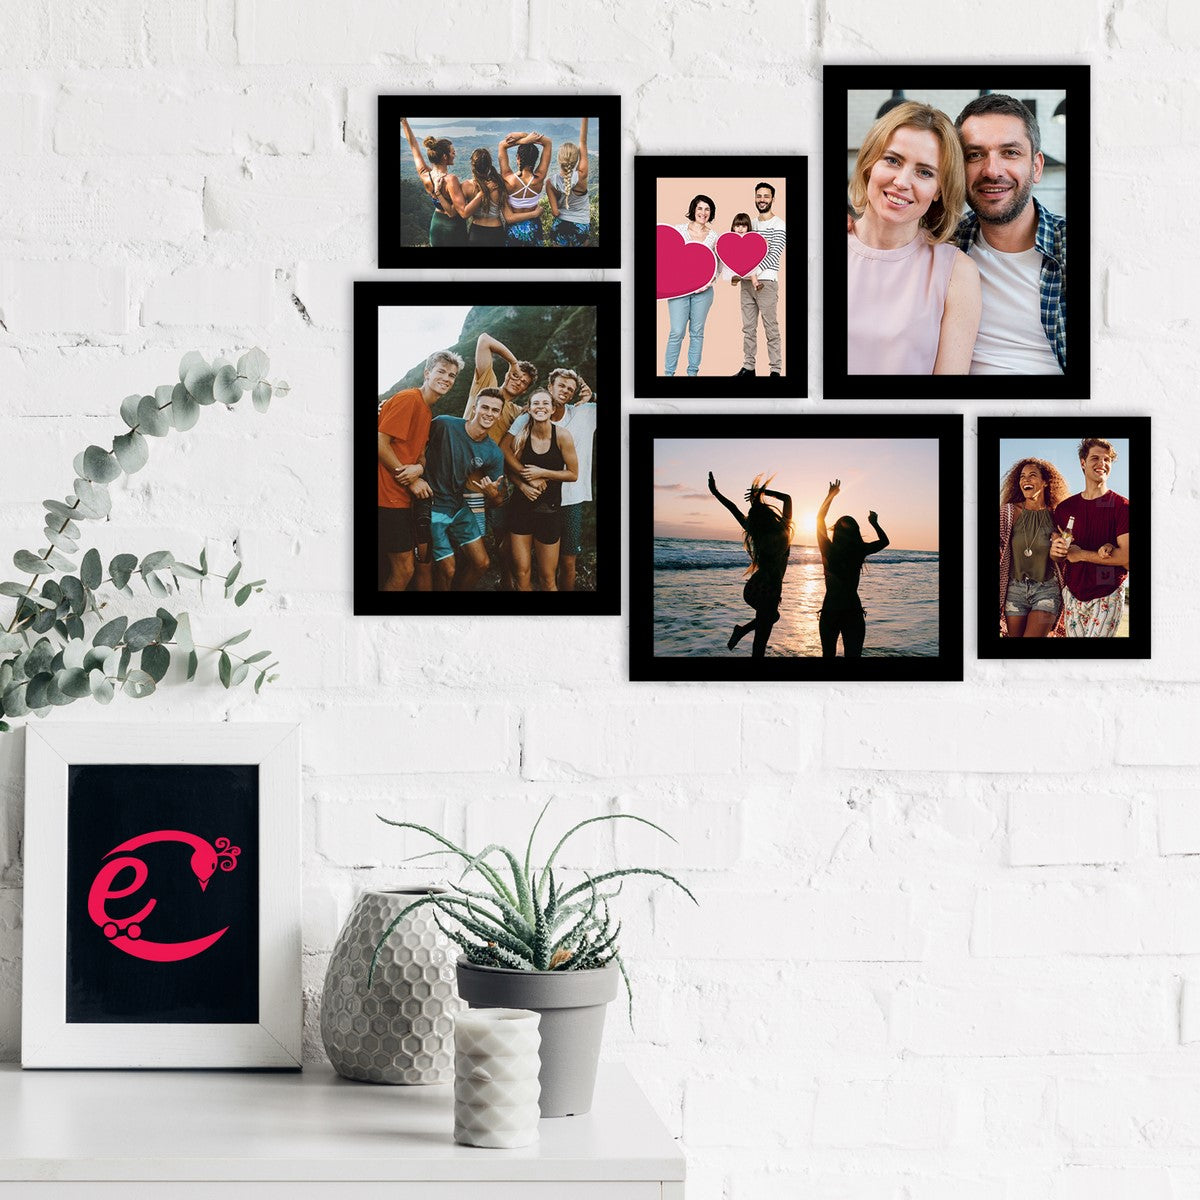 Memory Wall Collage Photo Frame - Set of 6 Photo Frames for 3 Photos of 5"x7", 3 Photos of 8"x10" 1